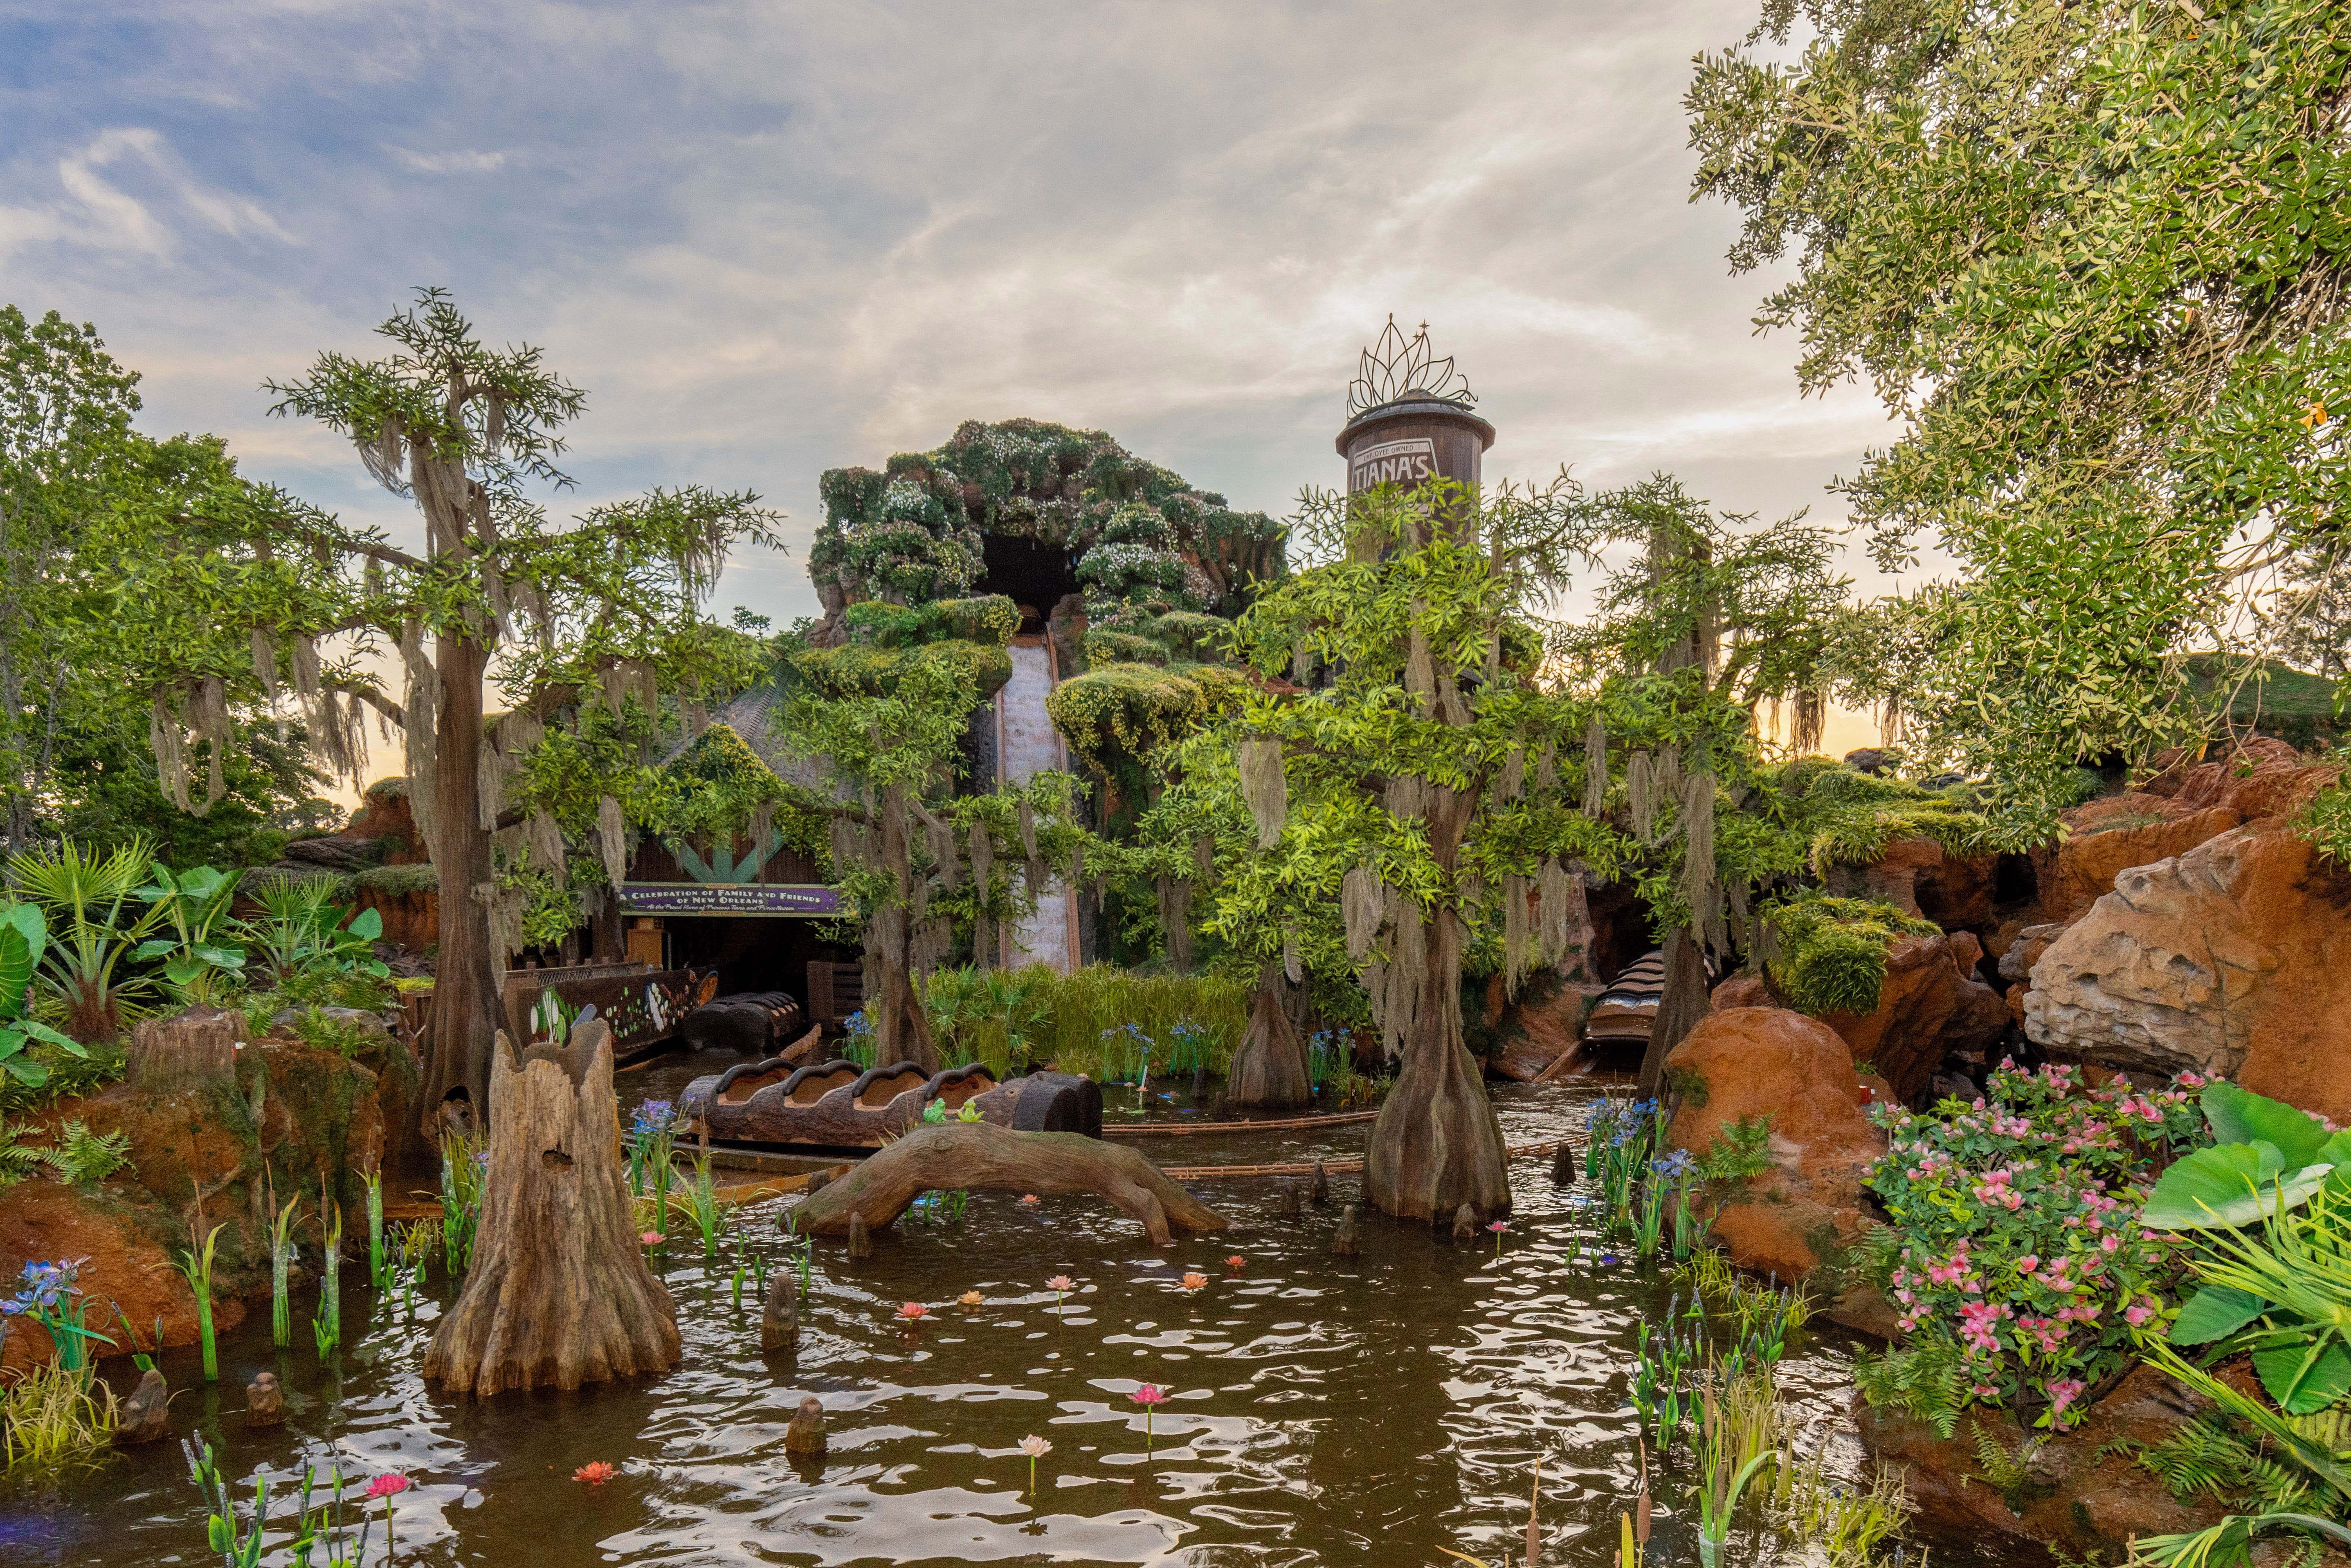 Here's when Tiana's Bayou Adventure ride will open at Disney World